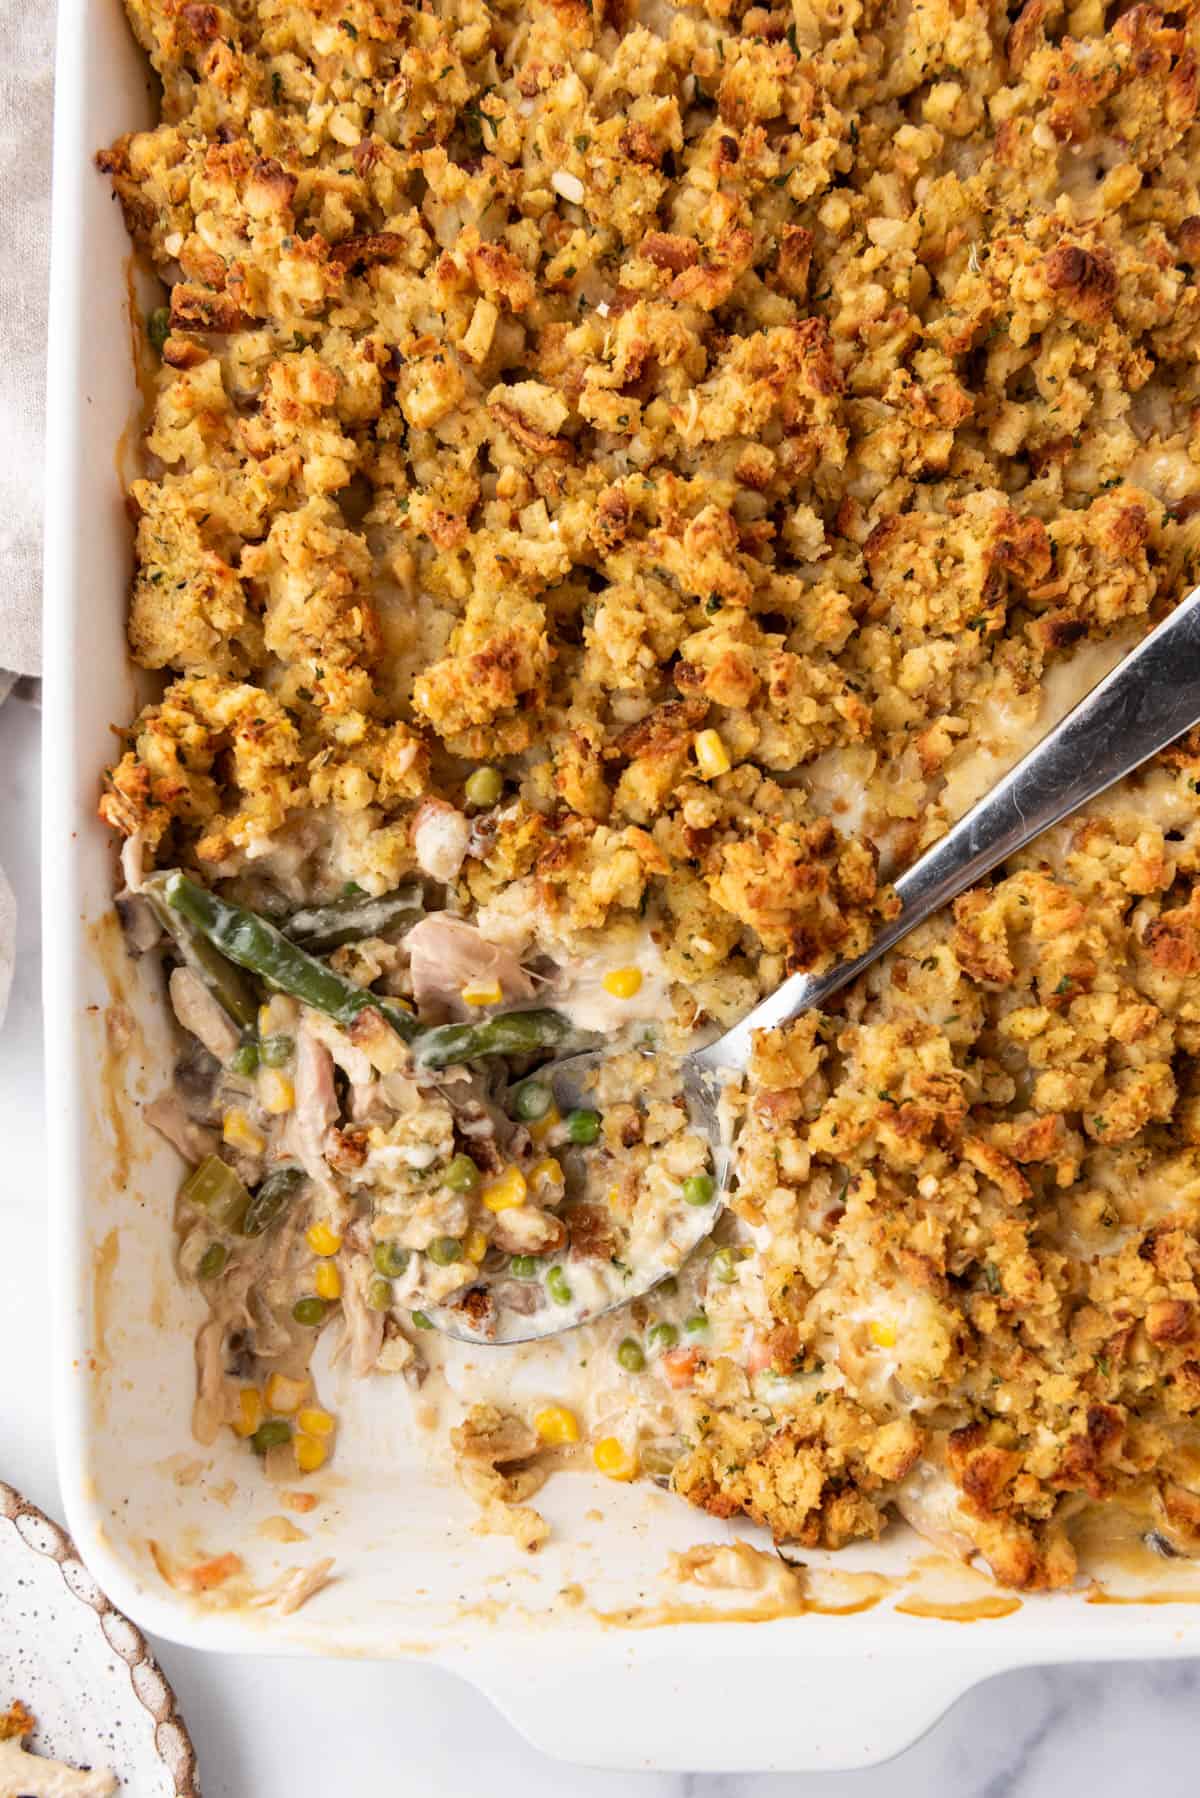 An overhead image of a pan full of chicken and stuffing casserole.